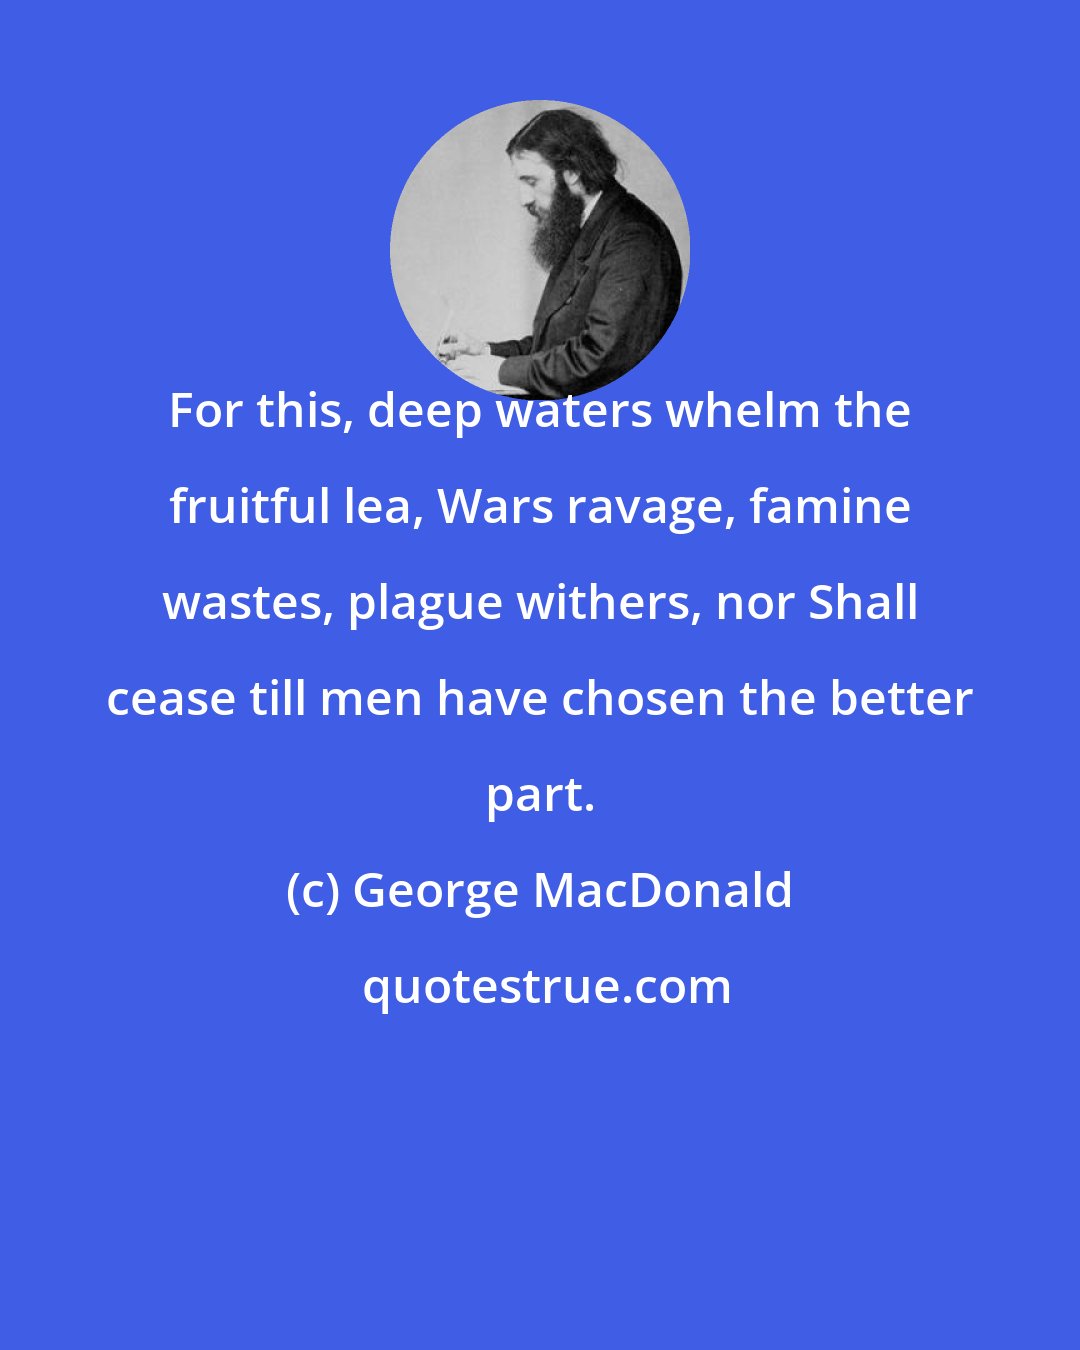 George MacDonald: For this, deep waters whelm the fruitful lea, Wars ravage, famine wastes, plague withers, nor Shall cease till men have chosen the better part.